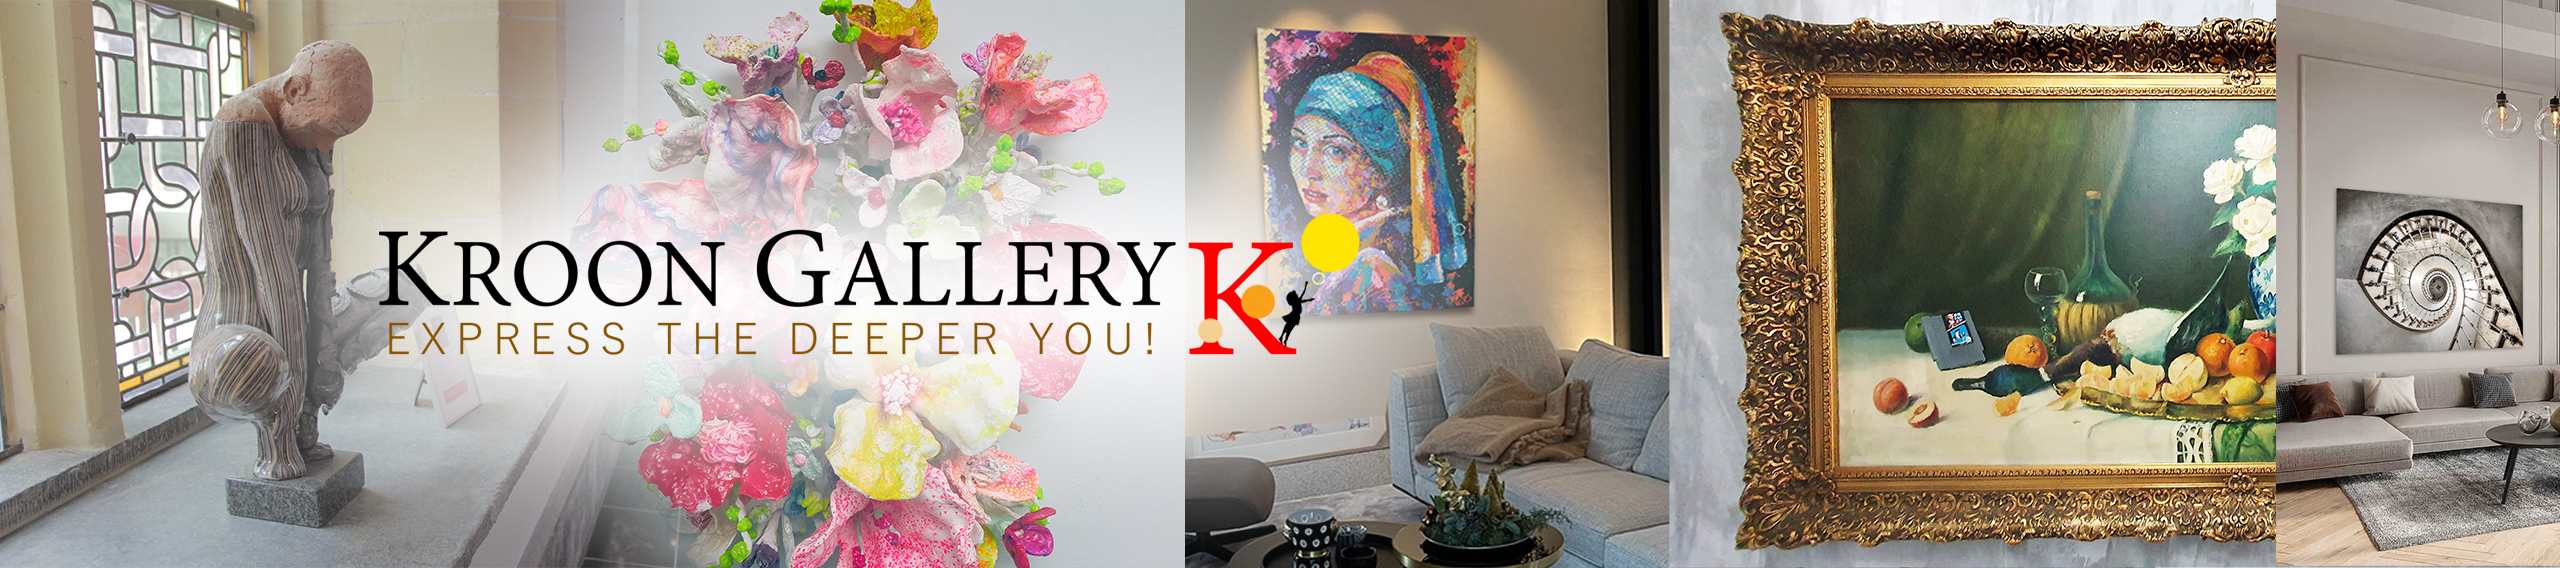 Kroon gallery - Express the deeper you